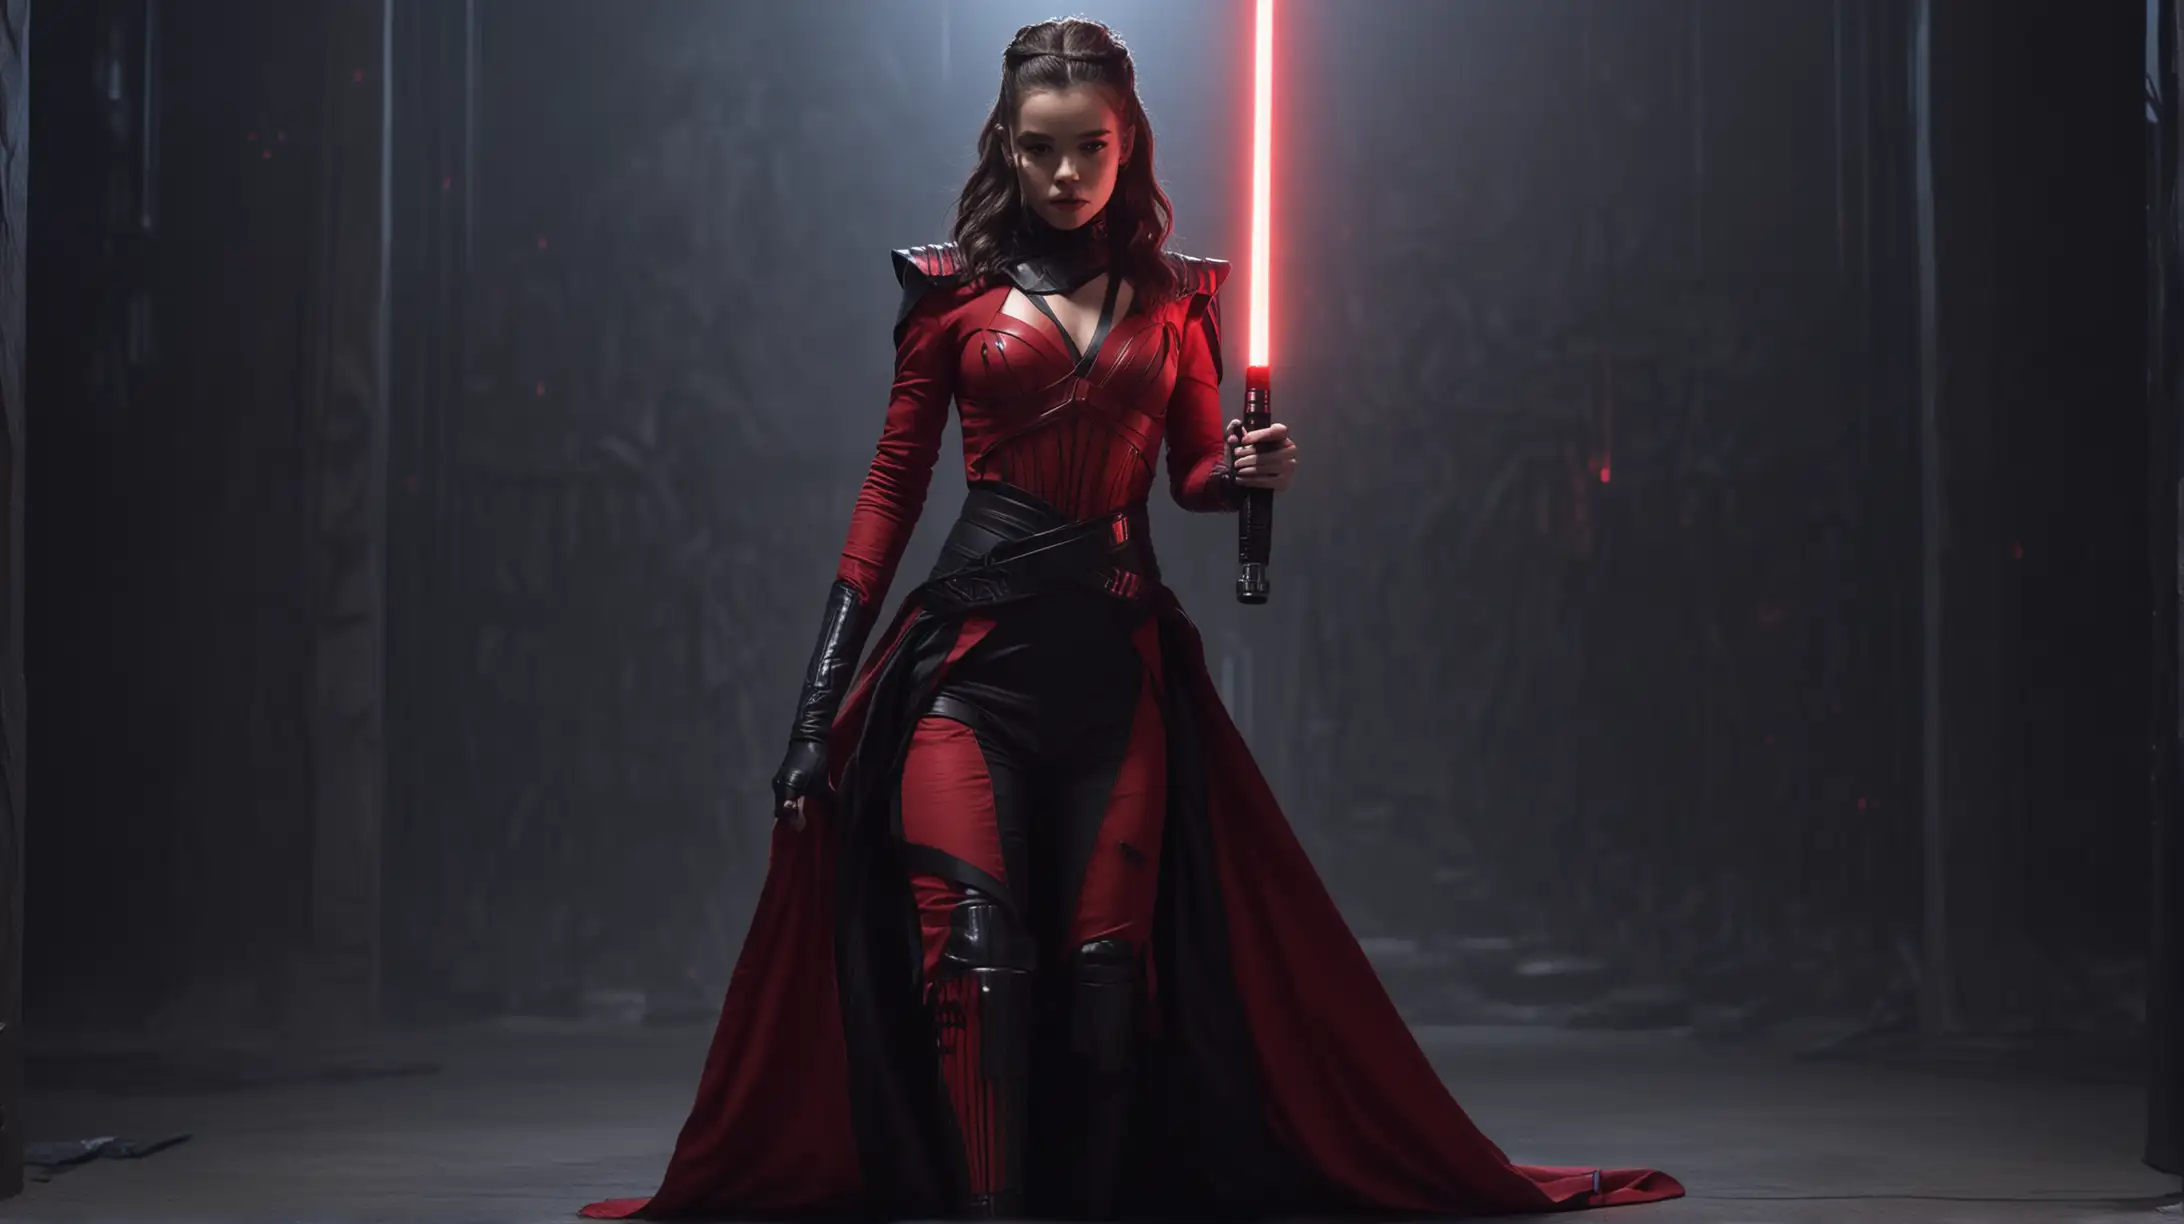 Hailee Steinfeld Sith Queen in Sultry Black and Red Garb with Lightsaber